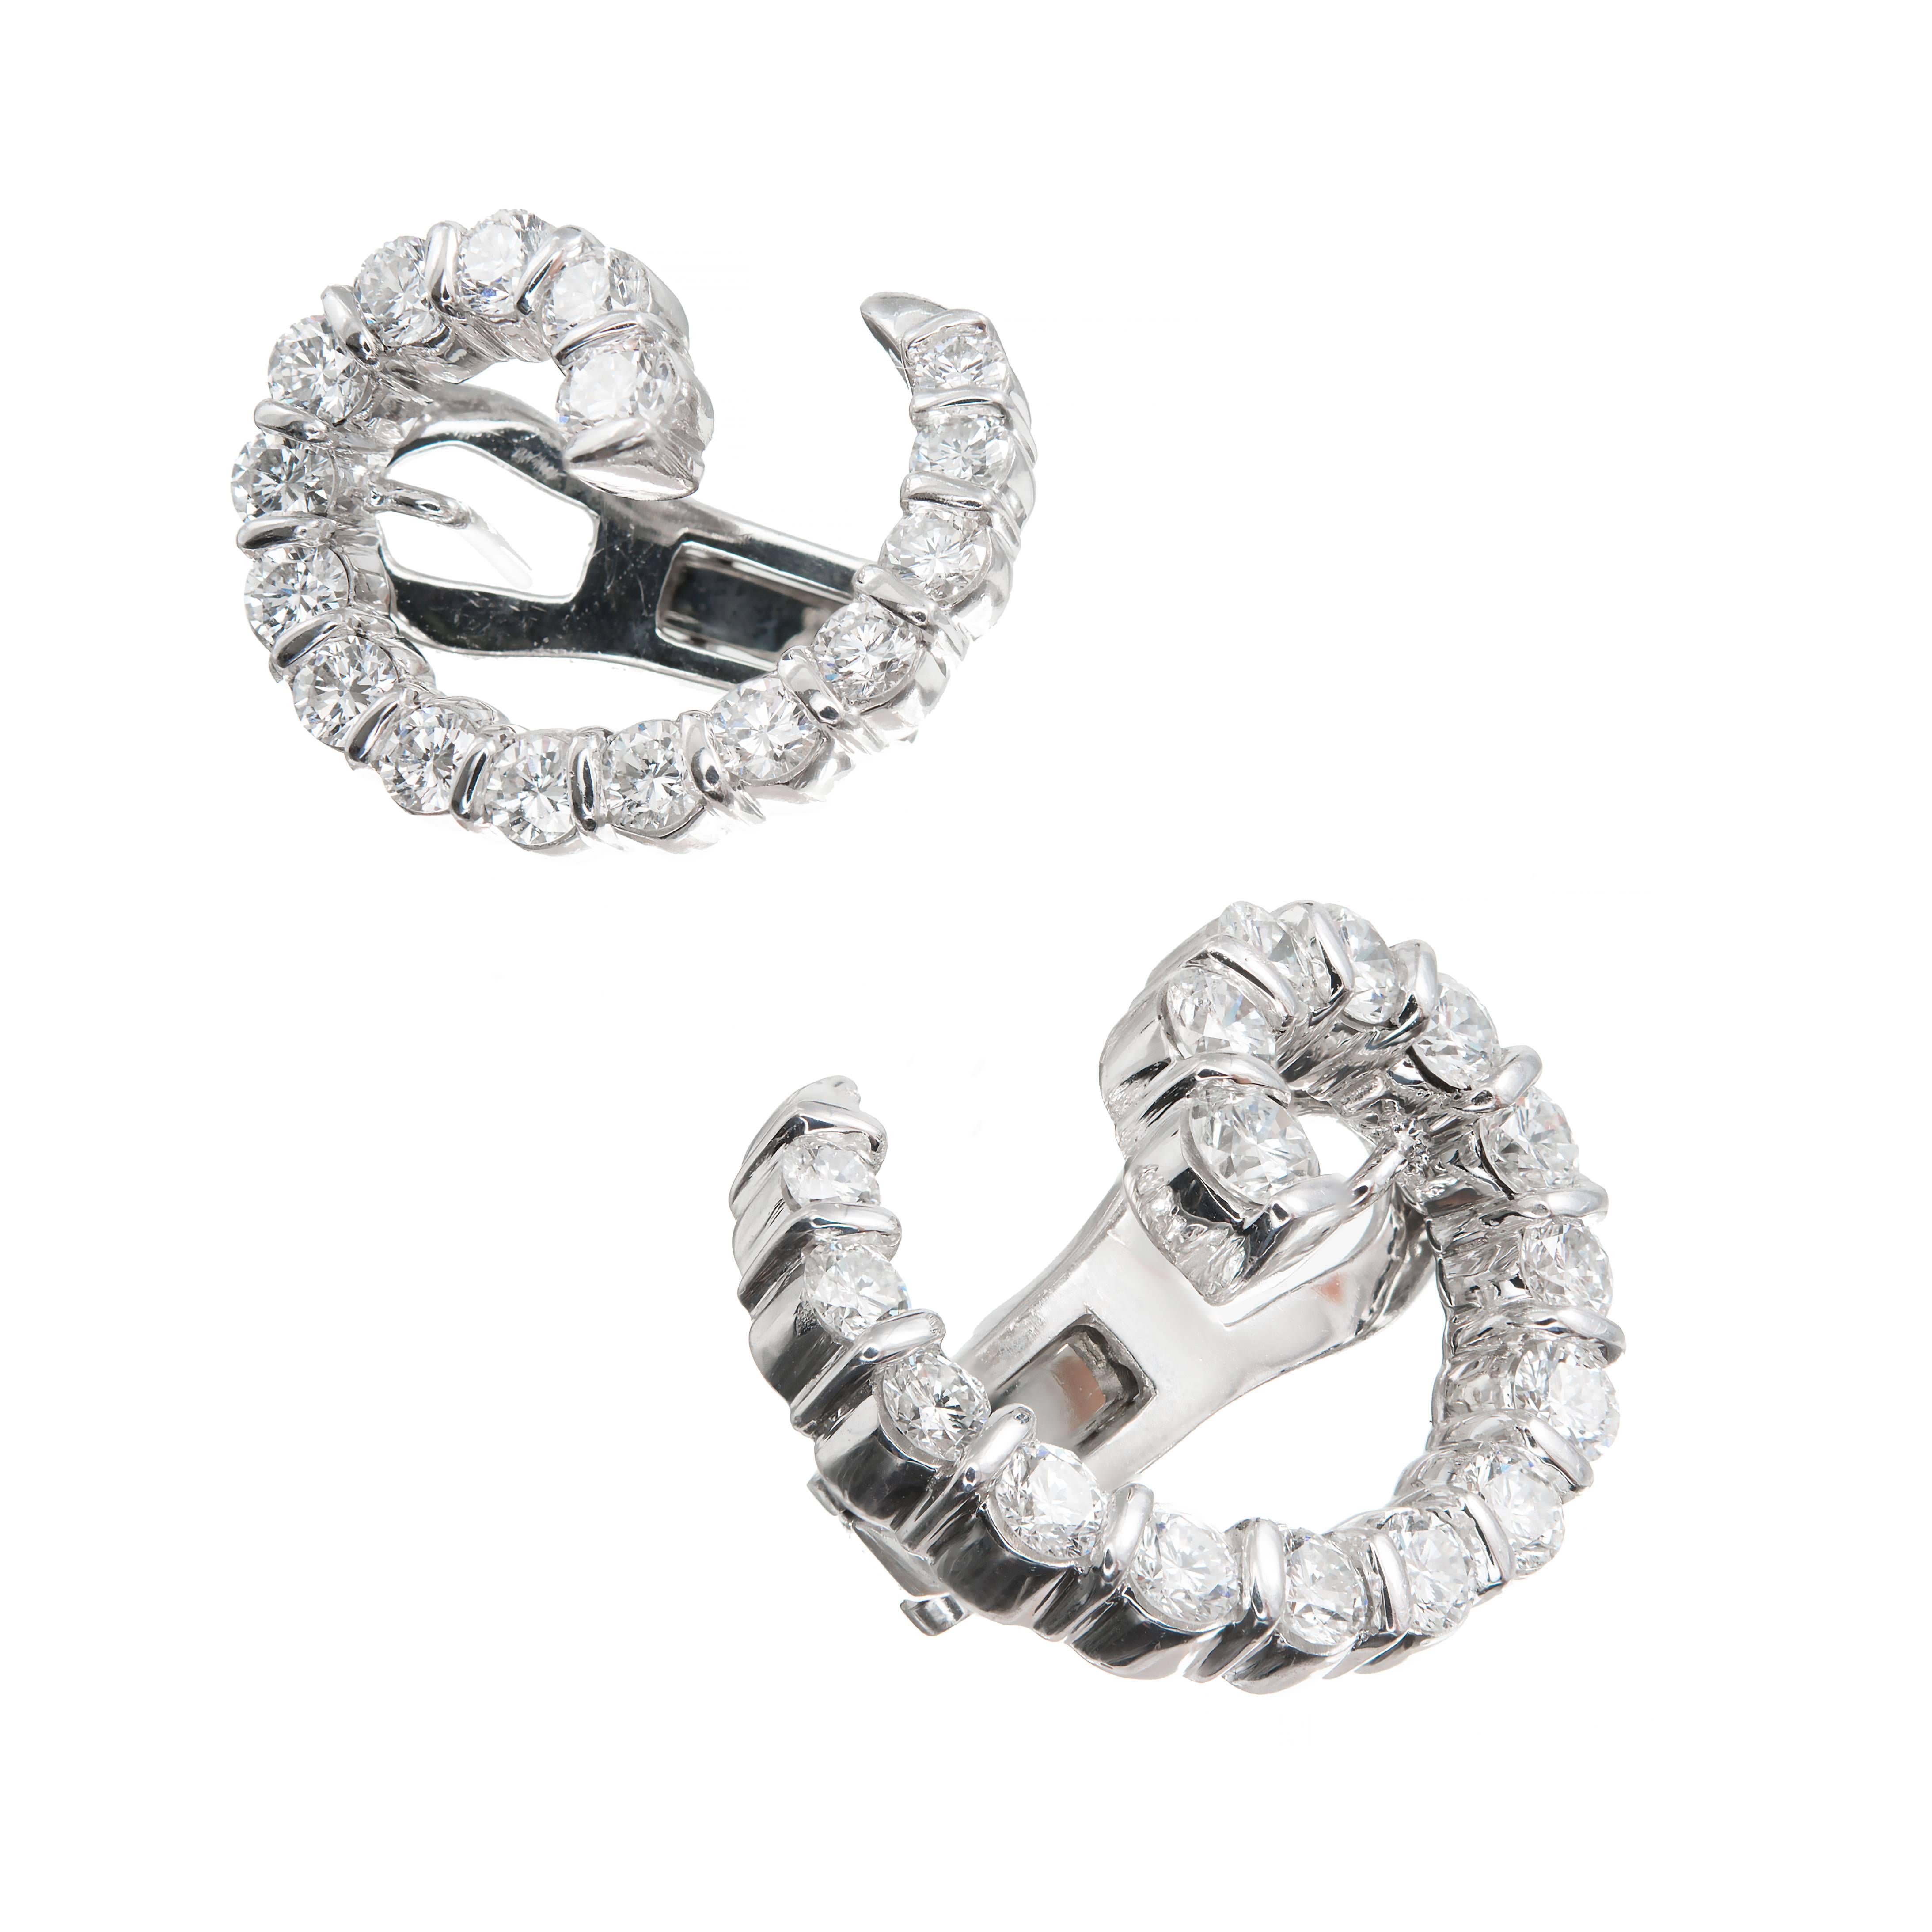 Authentic Gemlok Platinum Ideal clip post swirl earrings with F, VVS Ideal cut diamonds.

32 round Ideal cut diamonds, approx. total weight 2.00cts, F, VVS
Platinum
Tested: Platinum
Stamped: Plat
Hallmark: Gemlok
13.9 grams
Top to bottom: